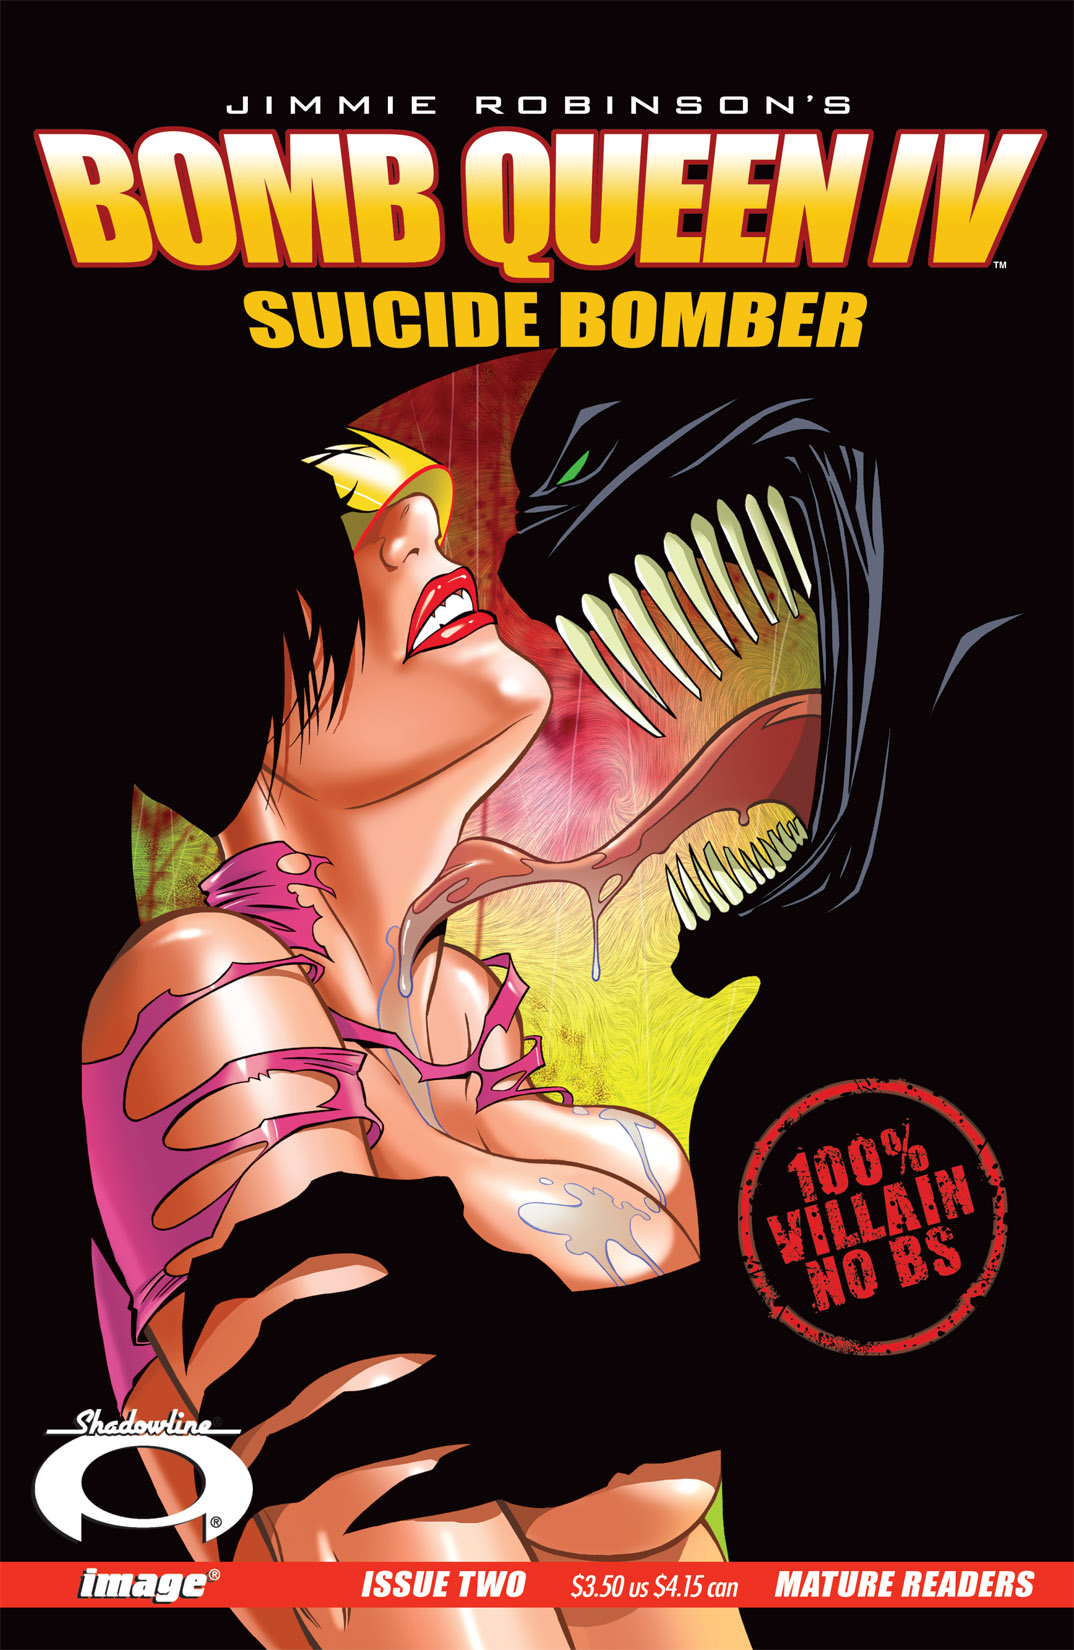 Read online Bomb Queen IV: Suicide Bomber comic -  Issue #2 - 1